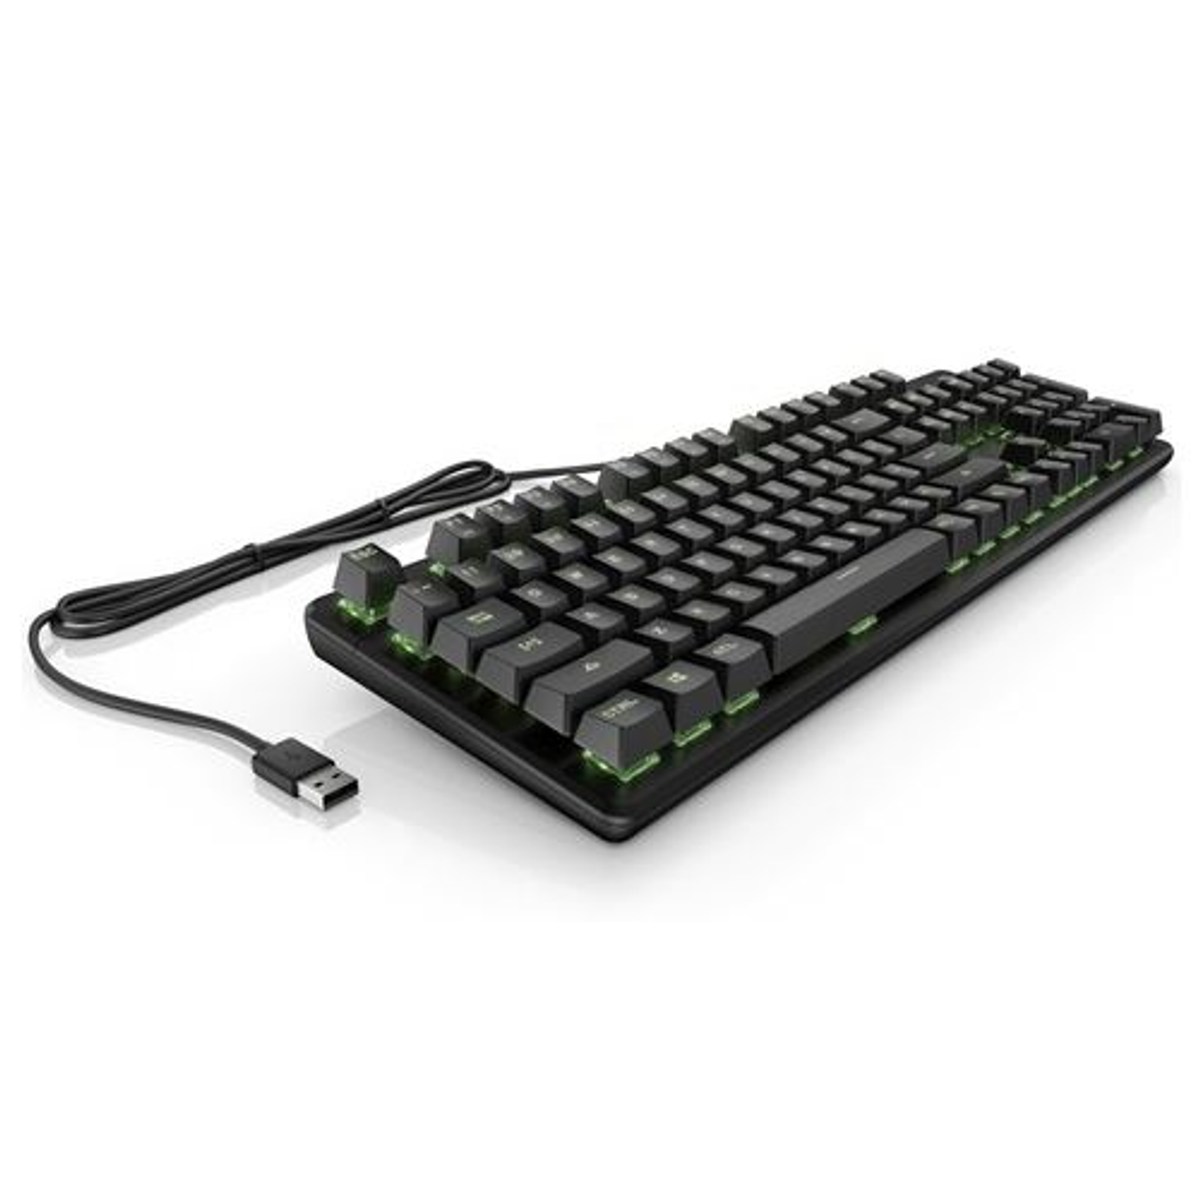 Teclado Con Cable para gaming hp pavilion 500 switch red multicolor keyboard 3vn40aa